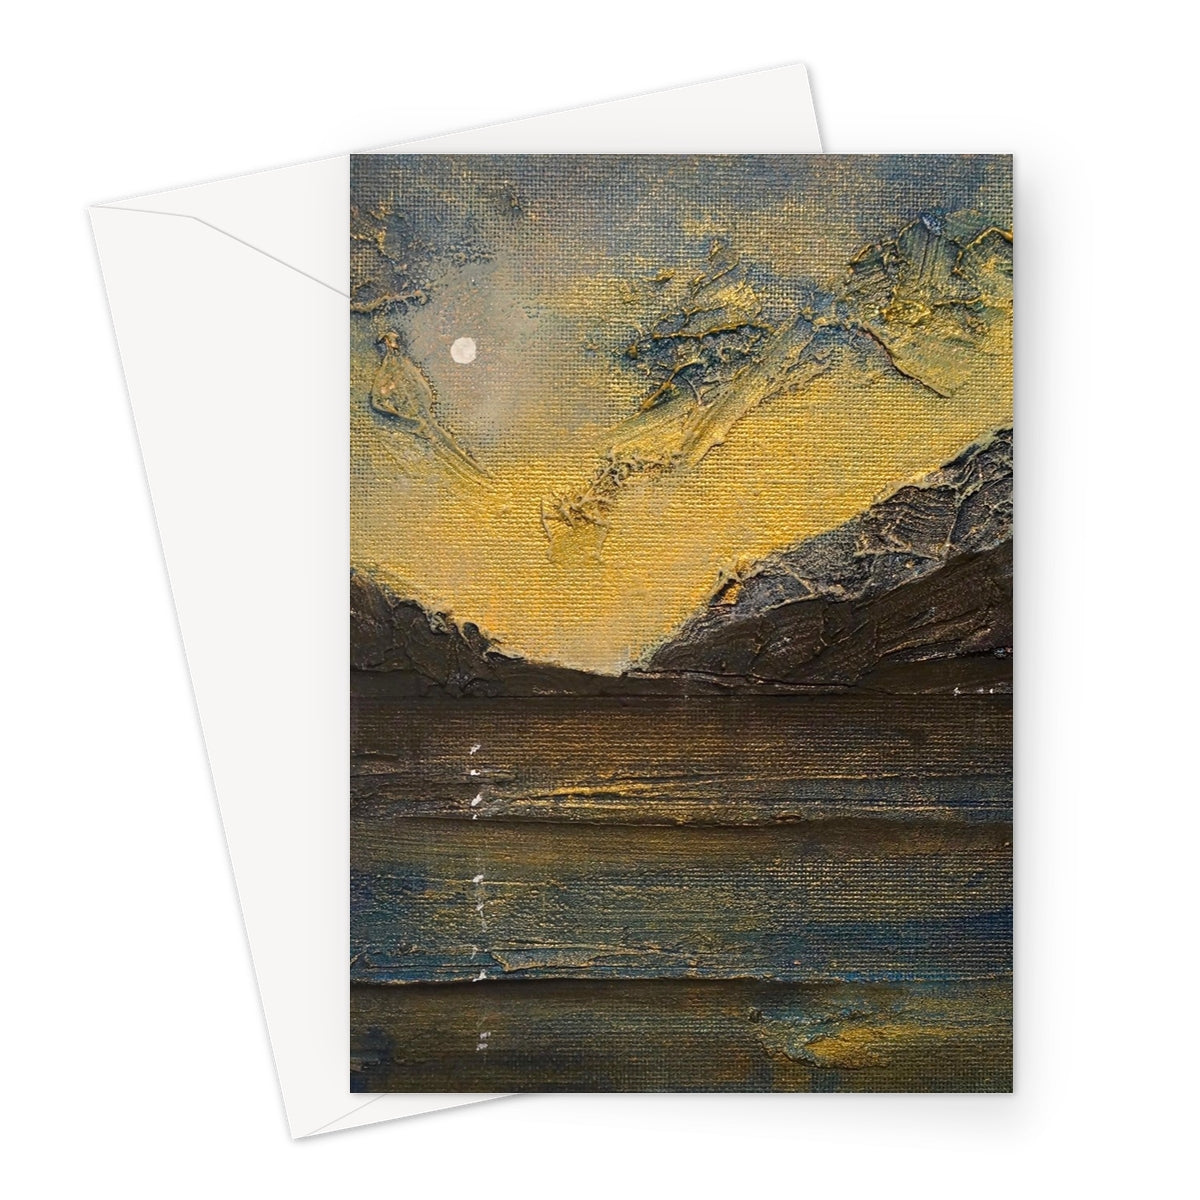 Loch Lomond Moonlight Art Gifts Greeting Card-Greetings Cards-Scottish Lochs & Mountains Art Gallery-A5 Portrait-1 Card-Paintings, Prints, Homeware, Art Gifts From Scotland By Scottish Artist Kevin Hunter